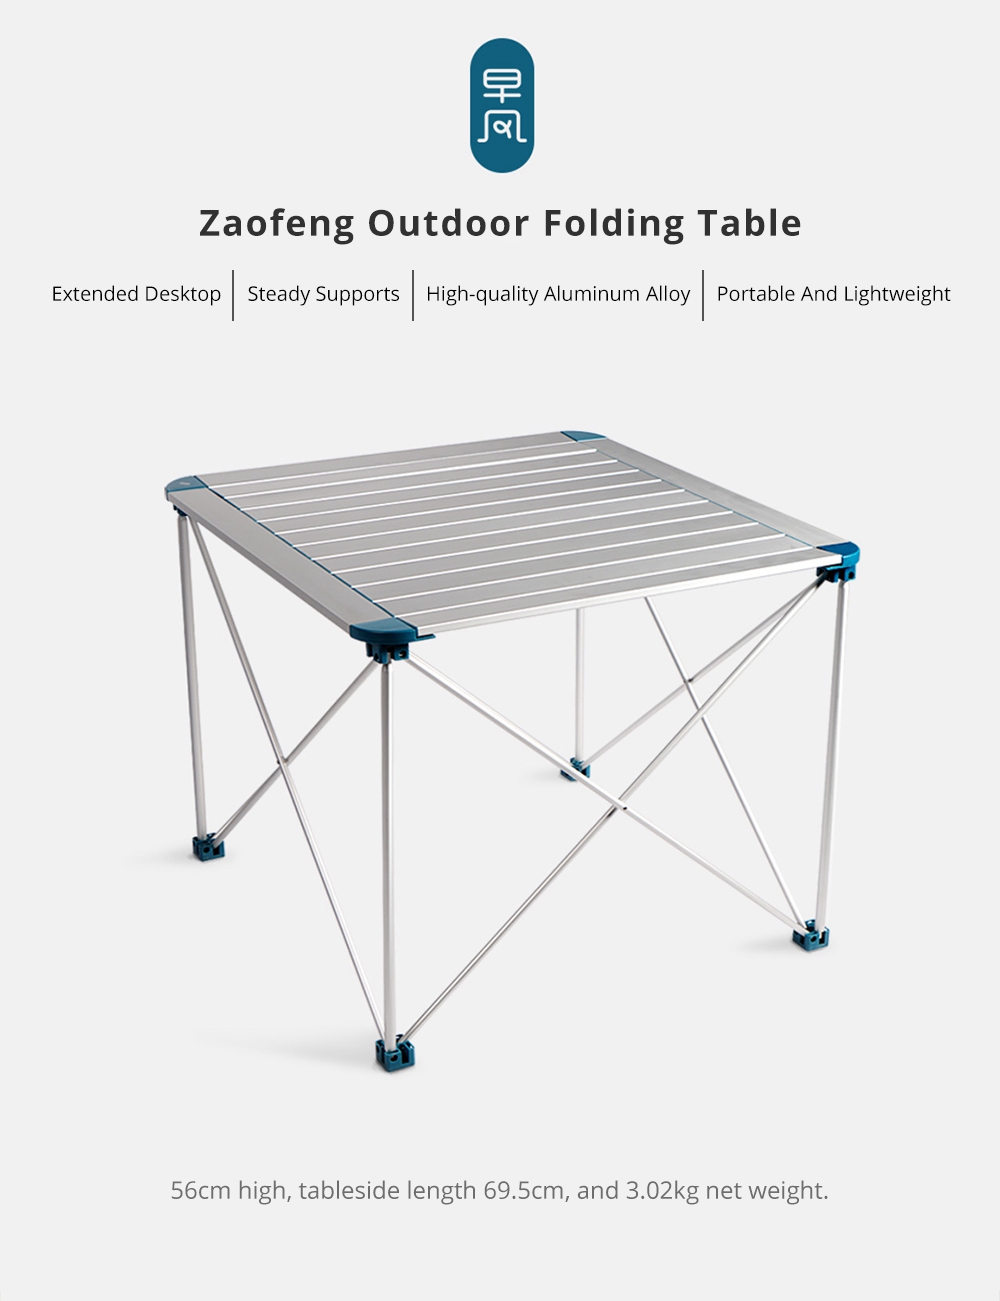 Xiaomi Zaofeng Outdoor Portable Folding Table Stable Lightweight Design - Gray + Blue